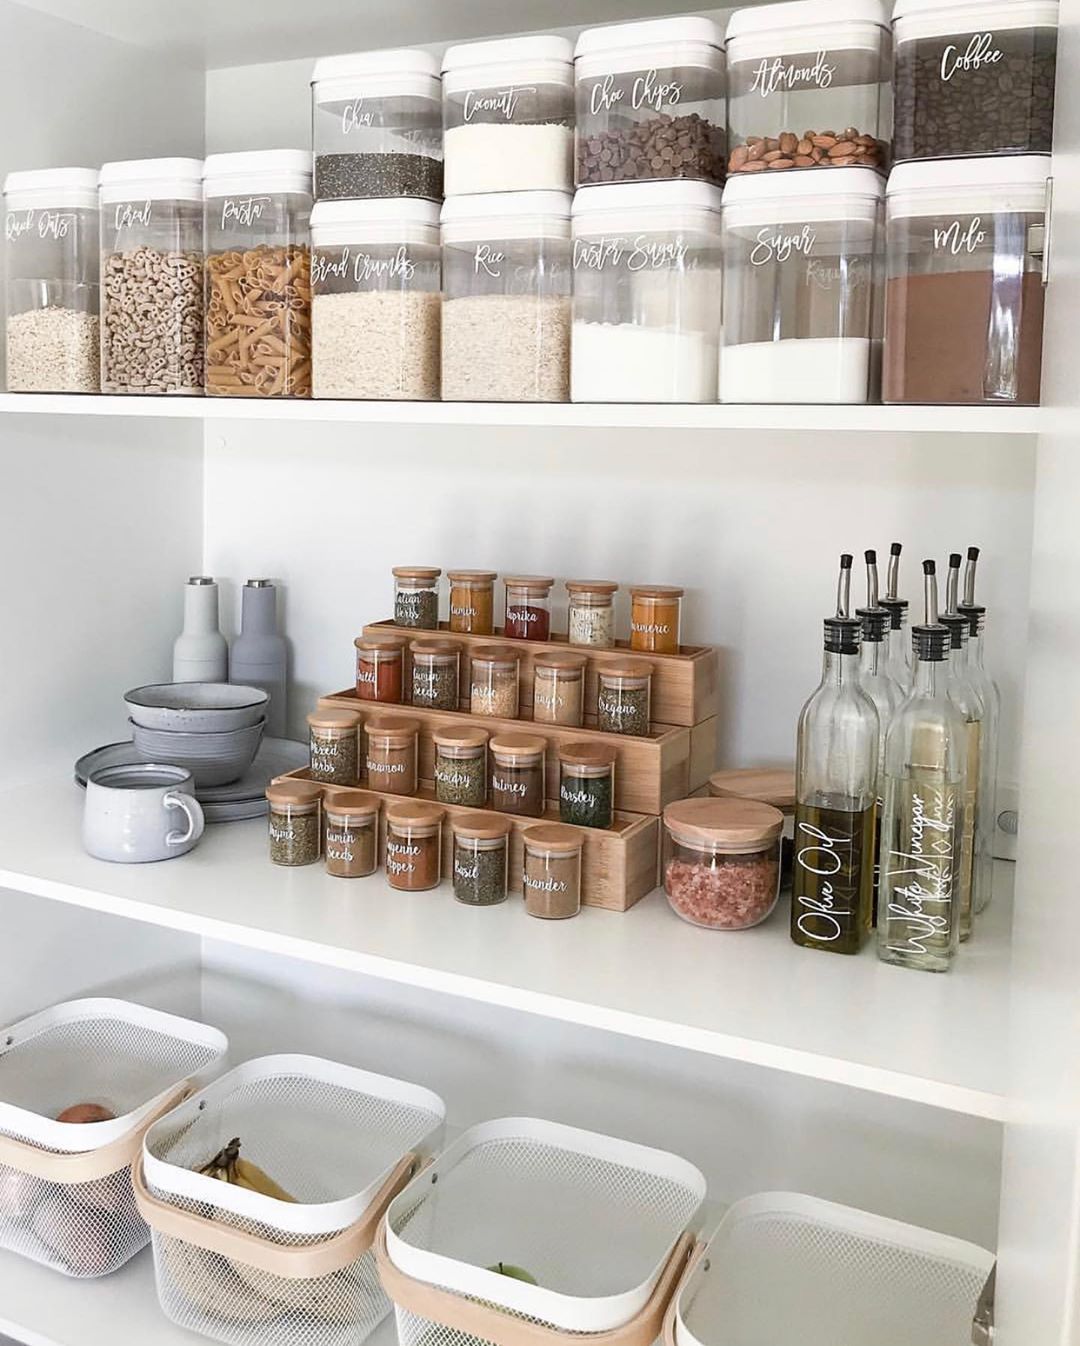 Food and spices in clear jars on white shelves. Photo by Instagram user @theruthlessorganizer